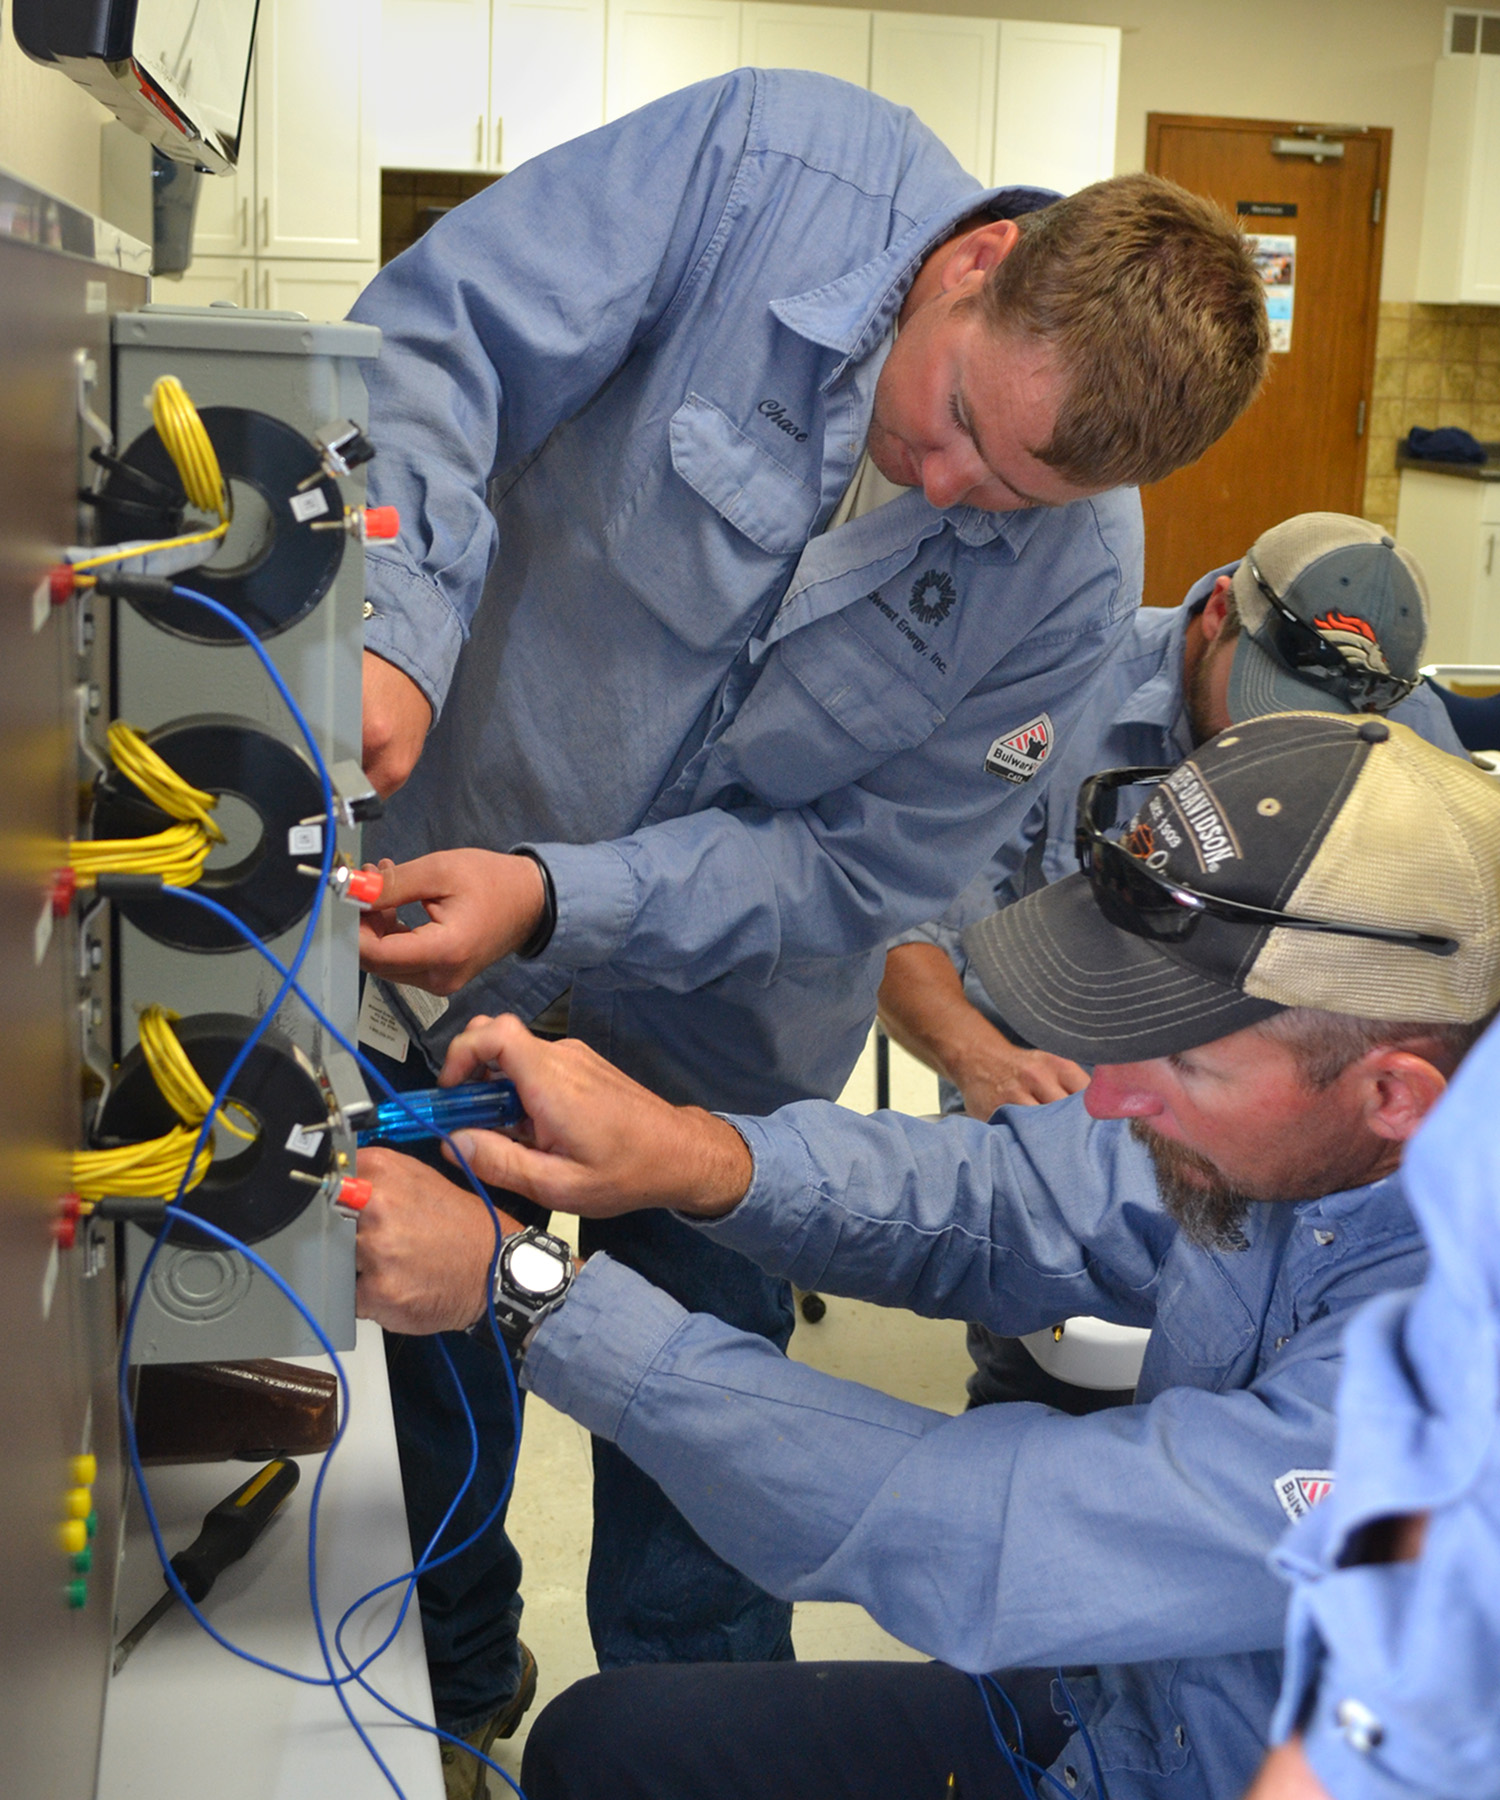 A picture of two Midwest Energy linemen in blue shirts work on a metering can simulator.